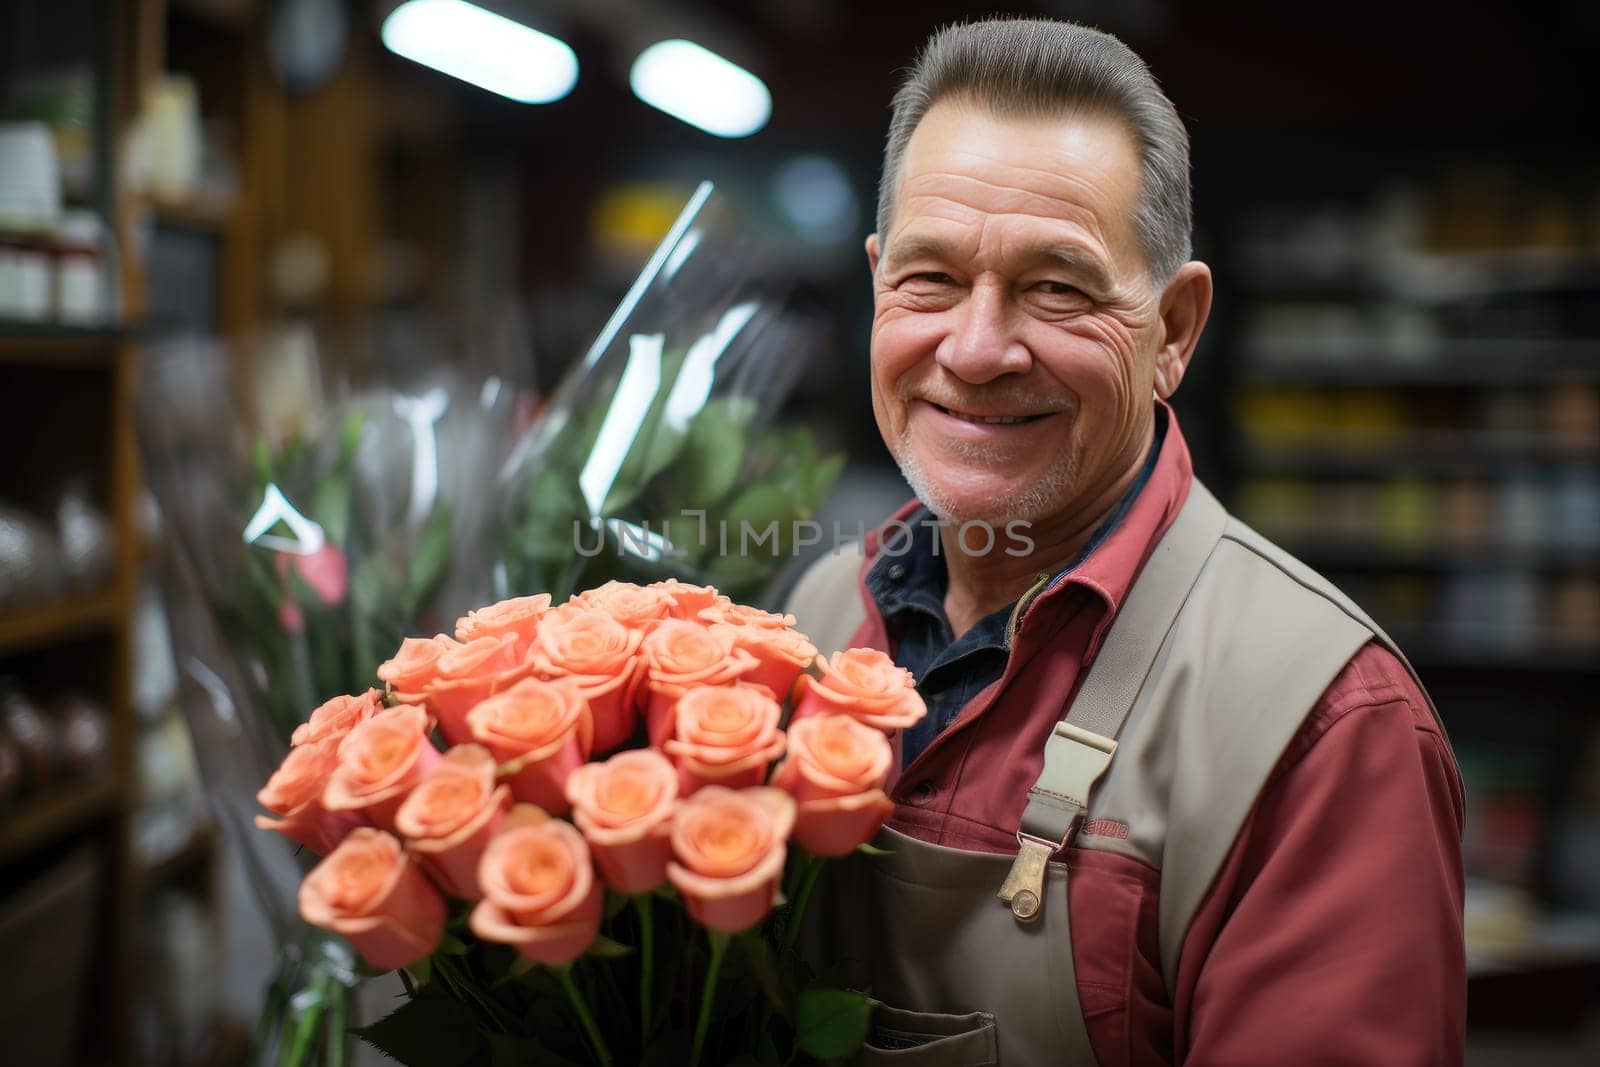 Love and Roses: Portrait of an admiring man with a bouquet of pink roses on Valentine's Day by Yurich32